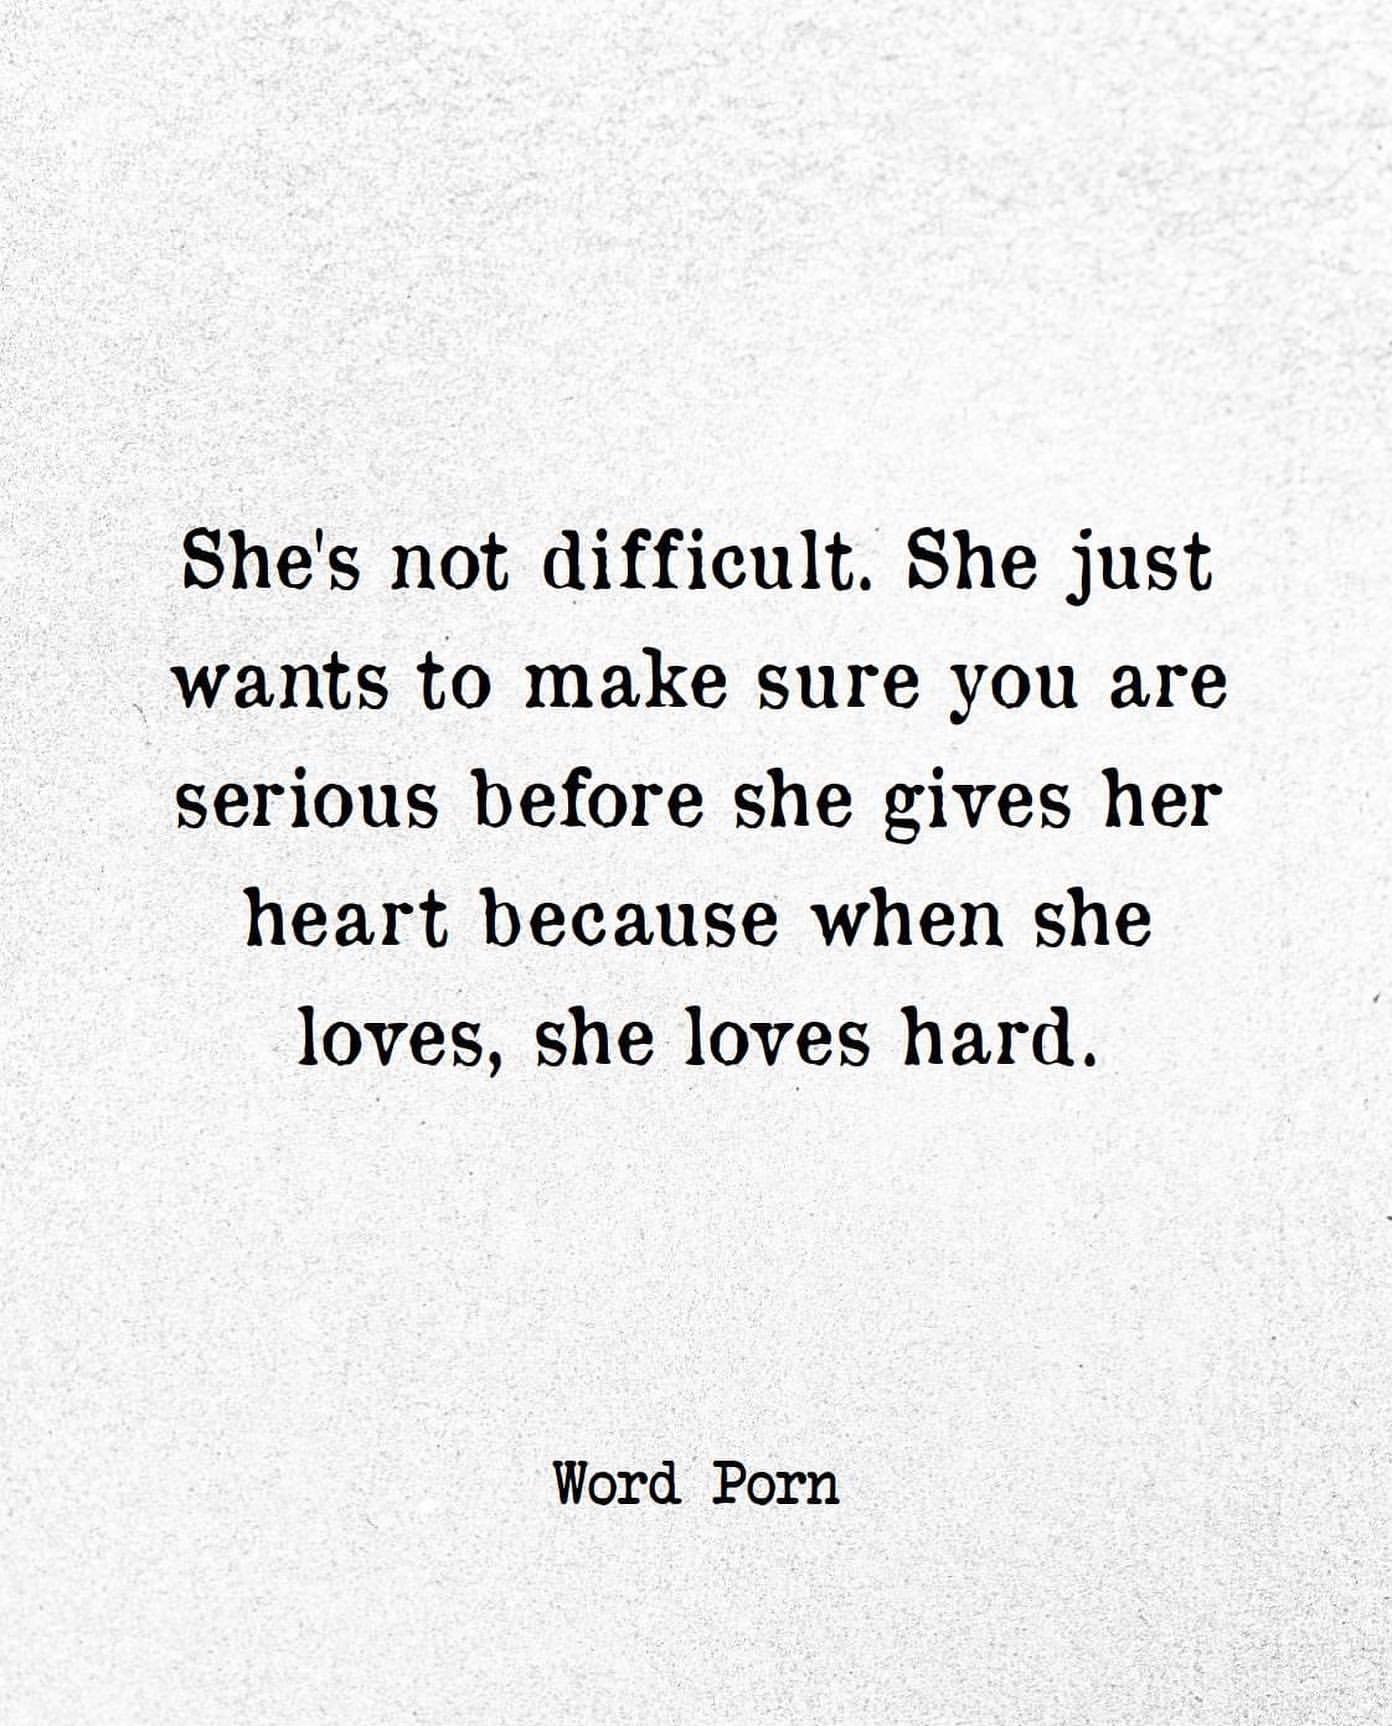 She's not difficult. She just wants to make sure you are serious before she gives her heart because when she loves, she loves hard.